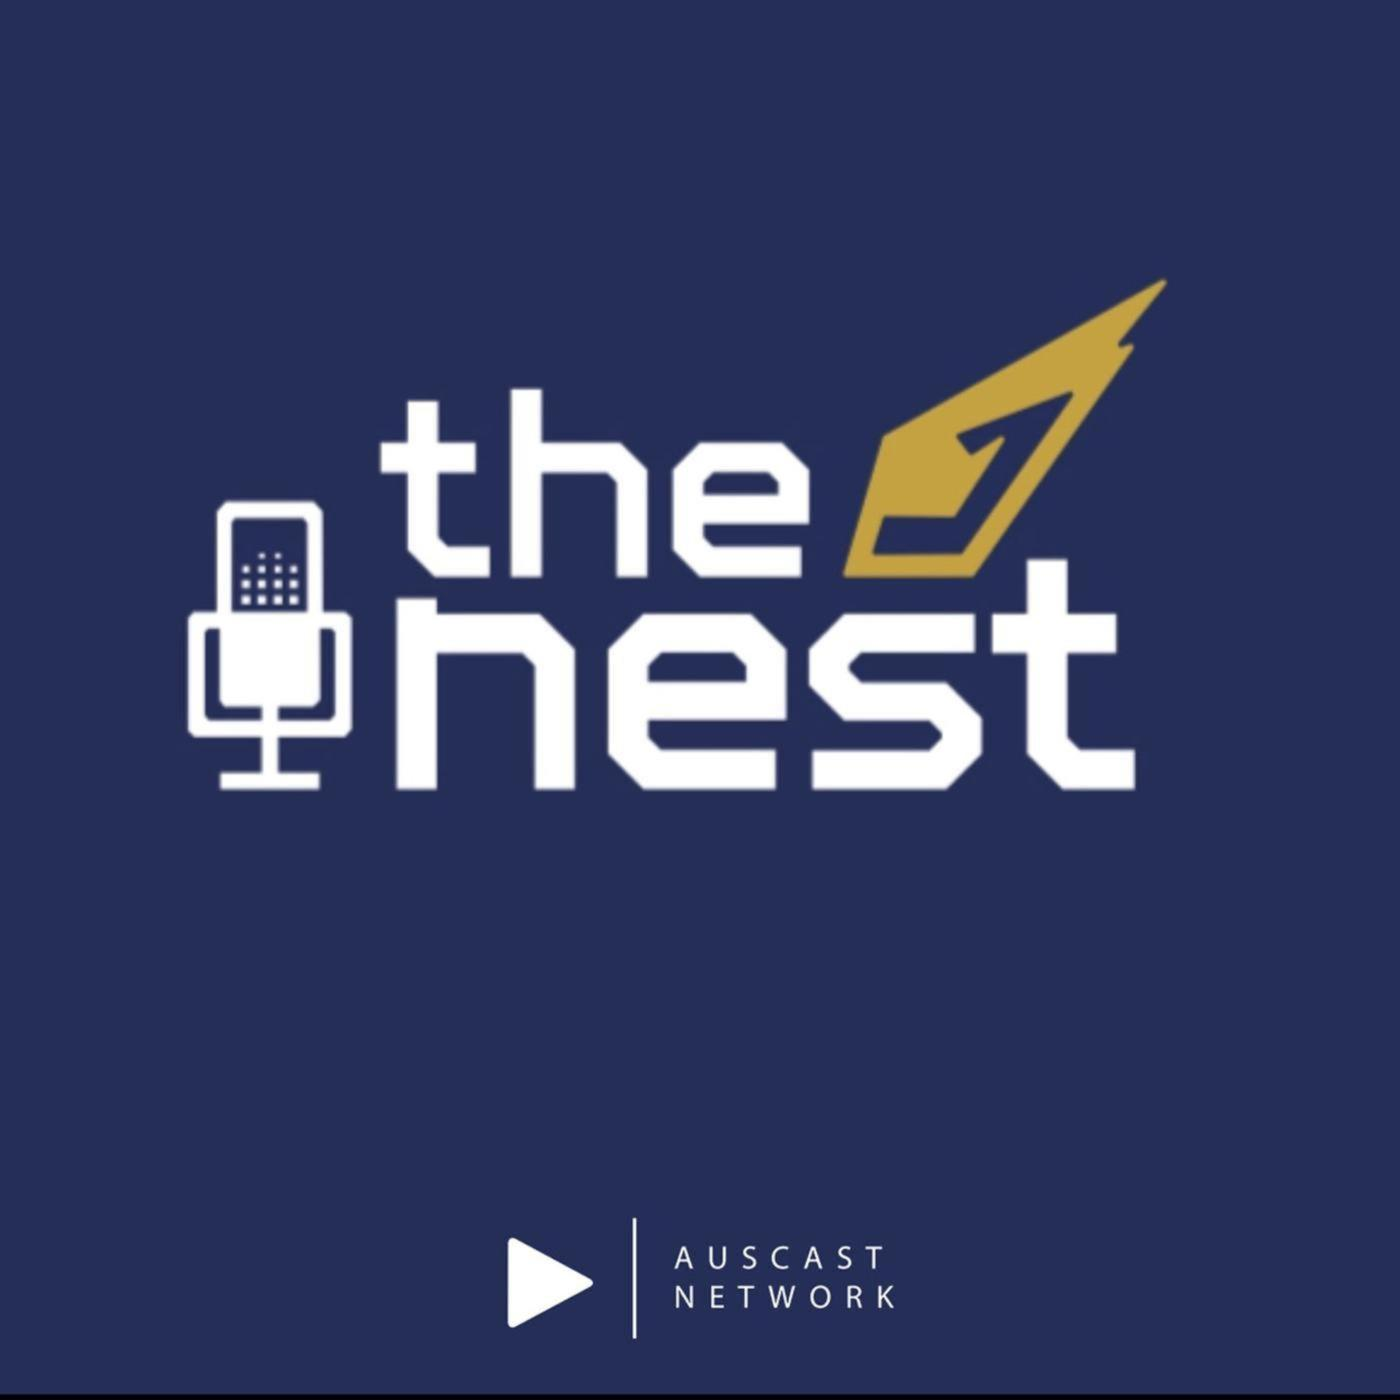 Why has it come to this? - The Nest